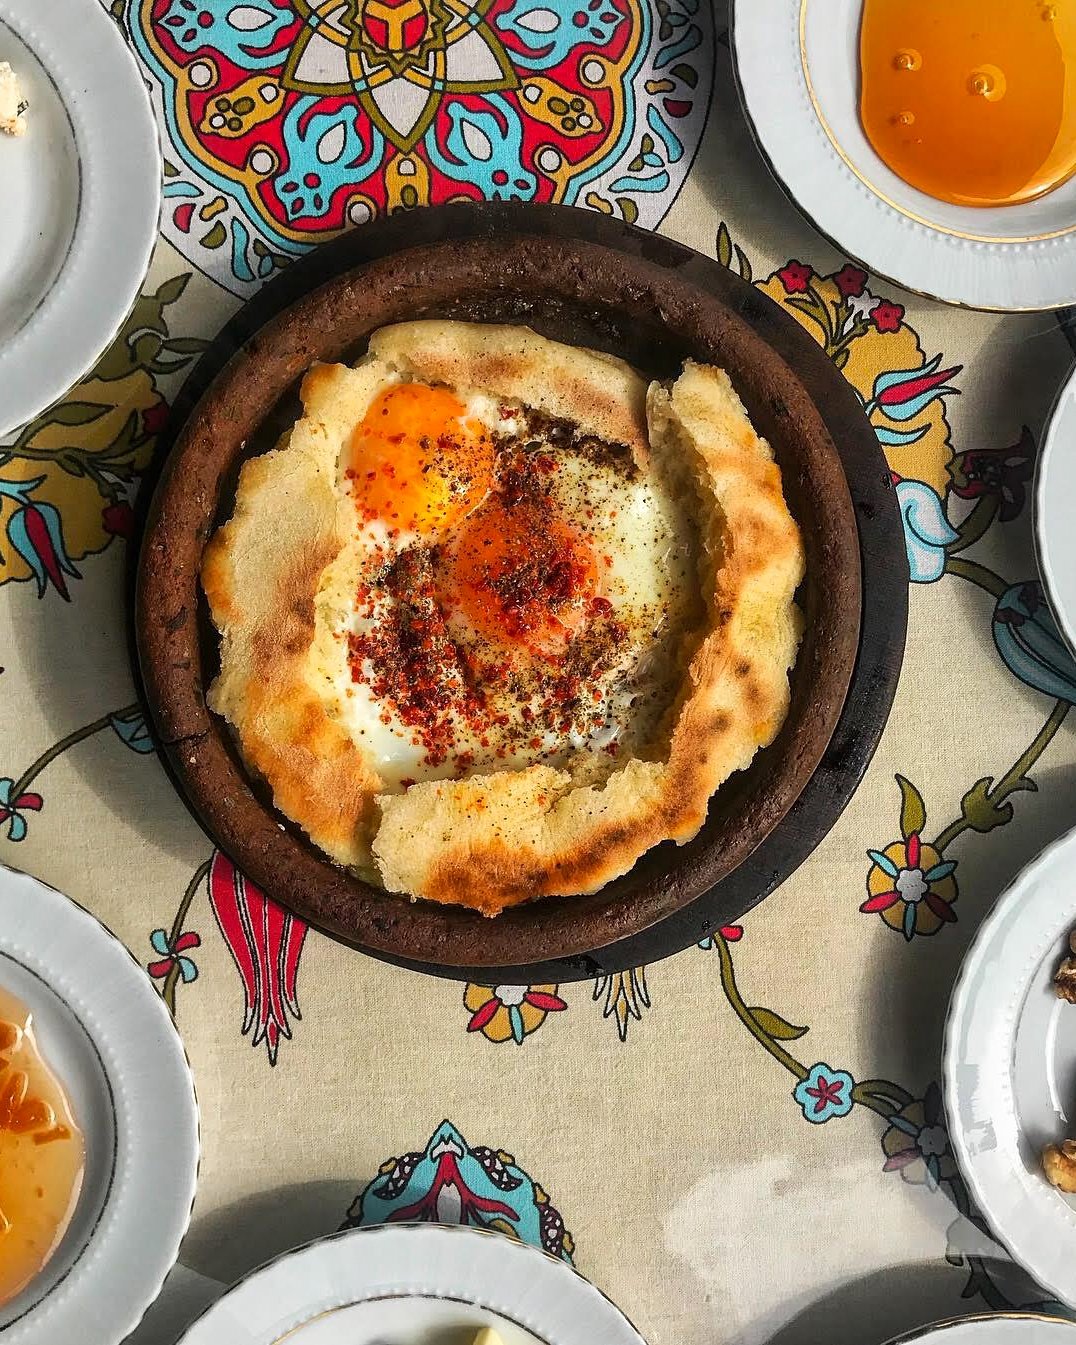 Traditional fried eggs served with some bazlama bread. (Photo by Argun Konuk)